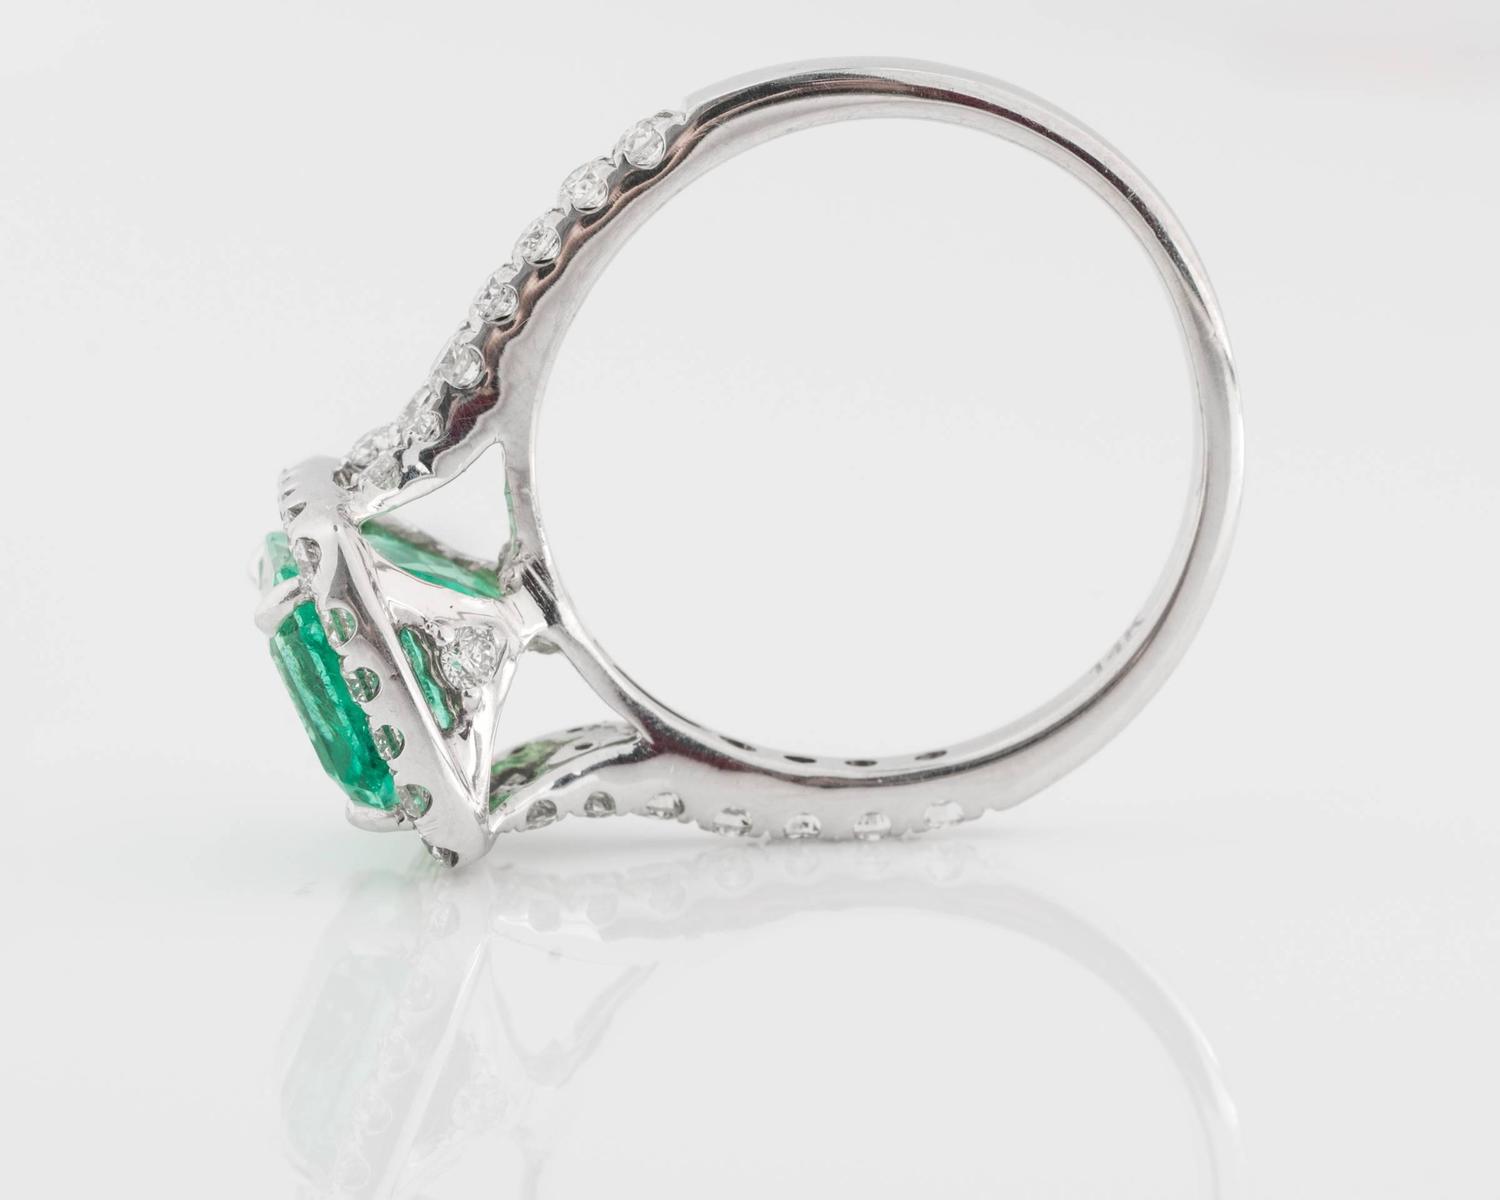 Columbian Emerald and Diamond Ring For Sale at 1stdibs